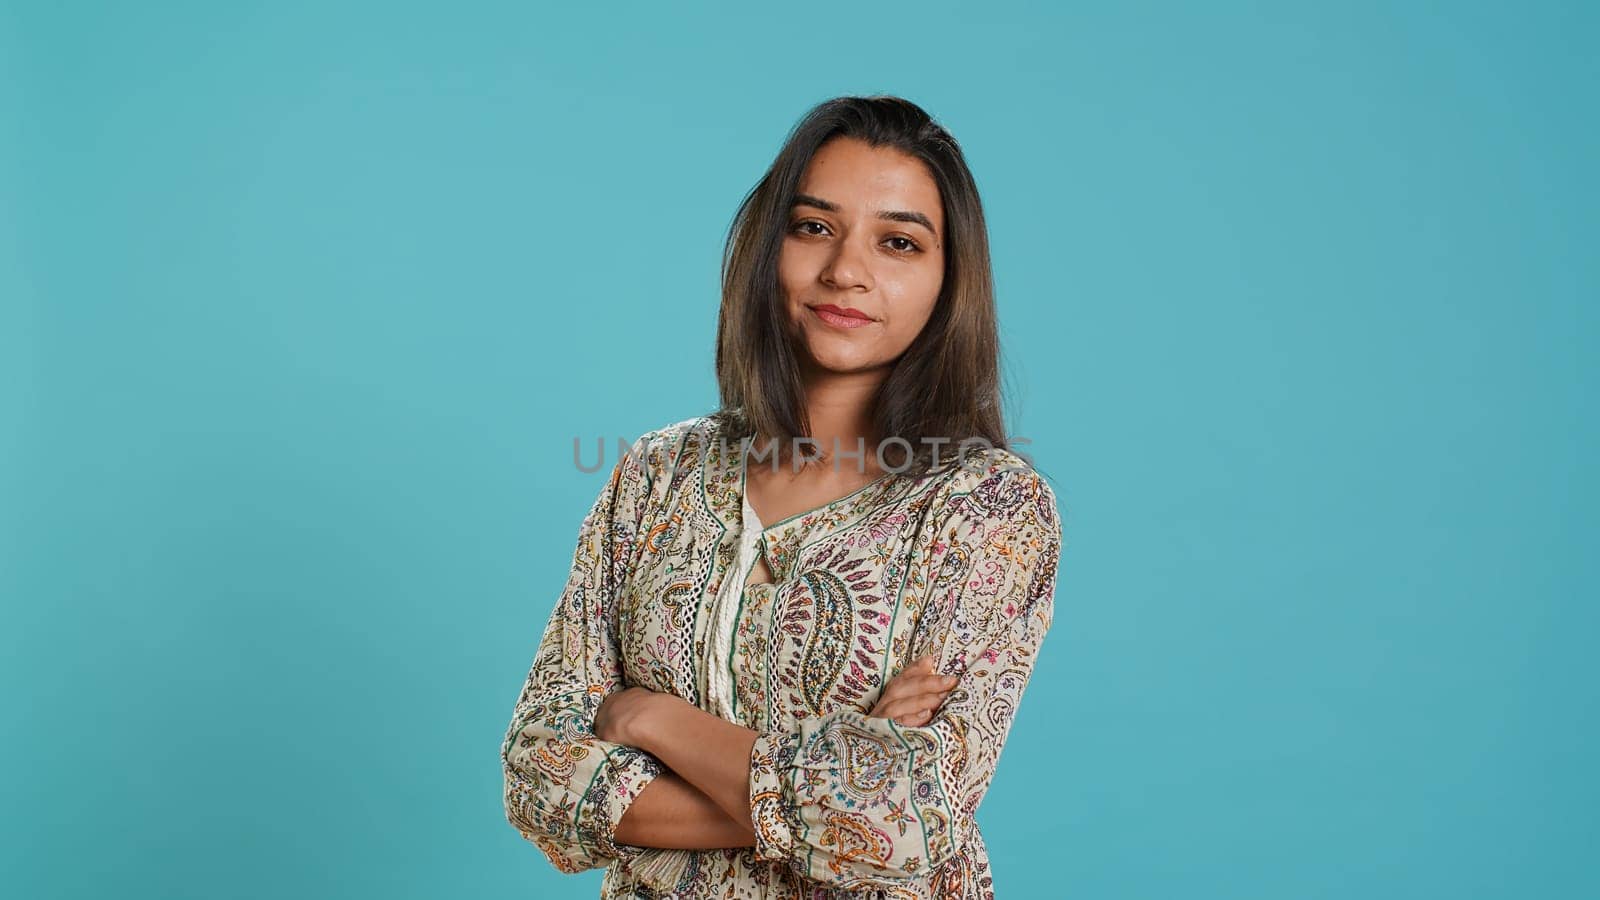 Portrait of cheerful friendly indian woman smiling, looking pleased, isolated over studio background. Happy person in traditional attire having positive facial expression, feeling satisfied, camera A